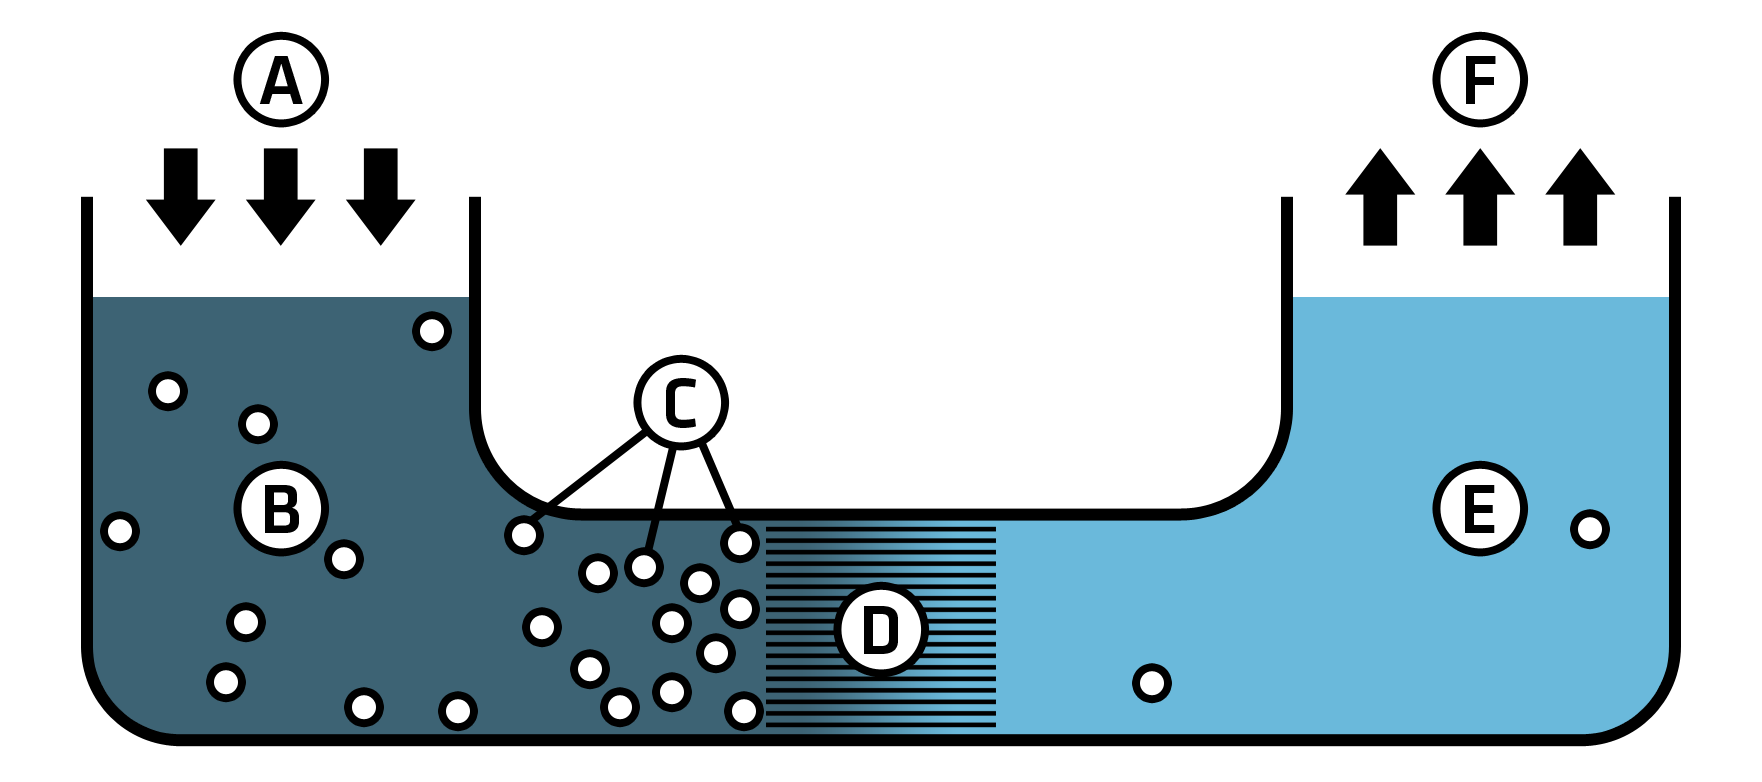 Reverse osmosis diagrammed by a U-shaped tube with contaminated water on the left, a membrane in the center, and clean water on the right.